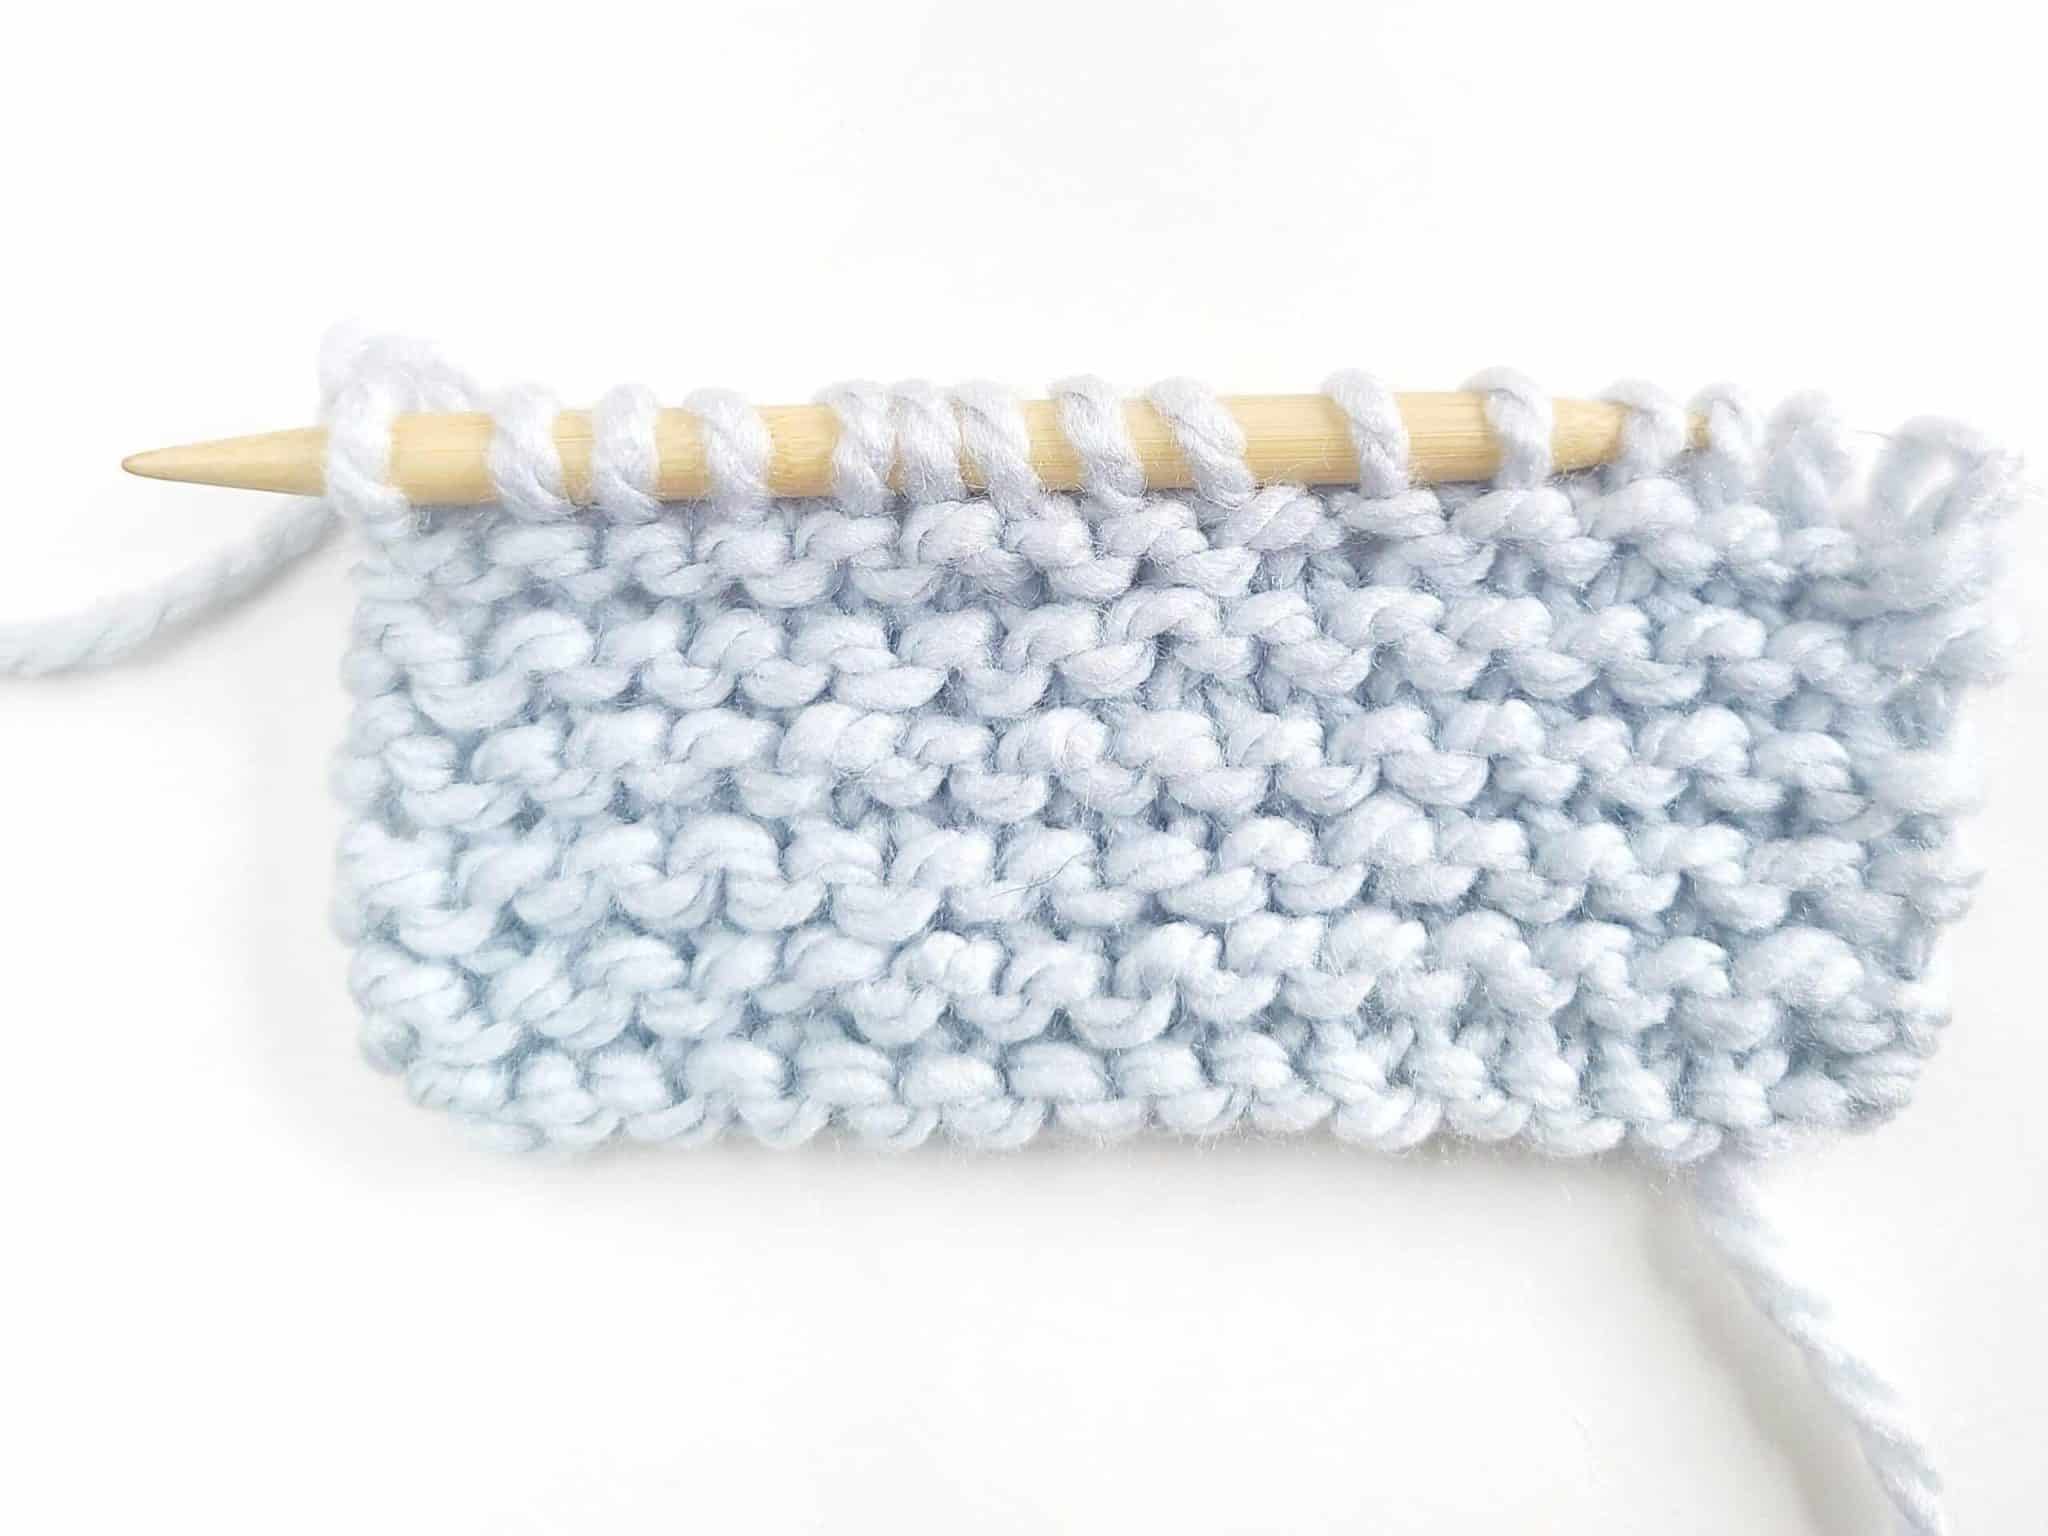 3 Easy Ways To Keep Track Of Row Count While Crocheting